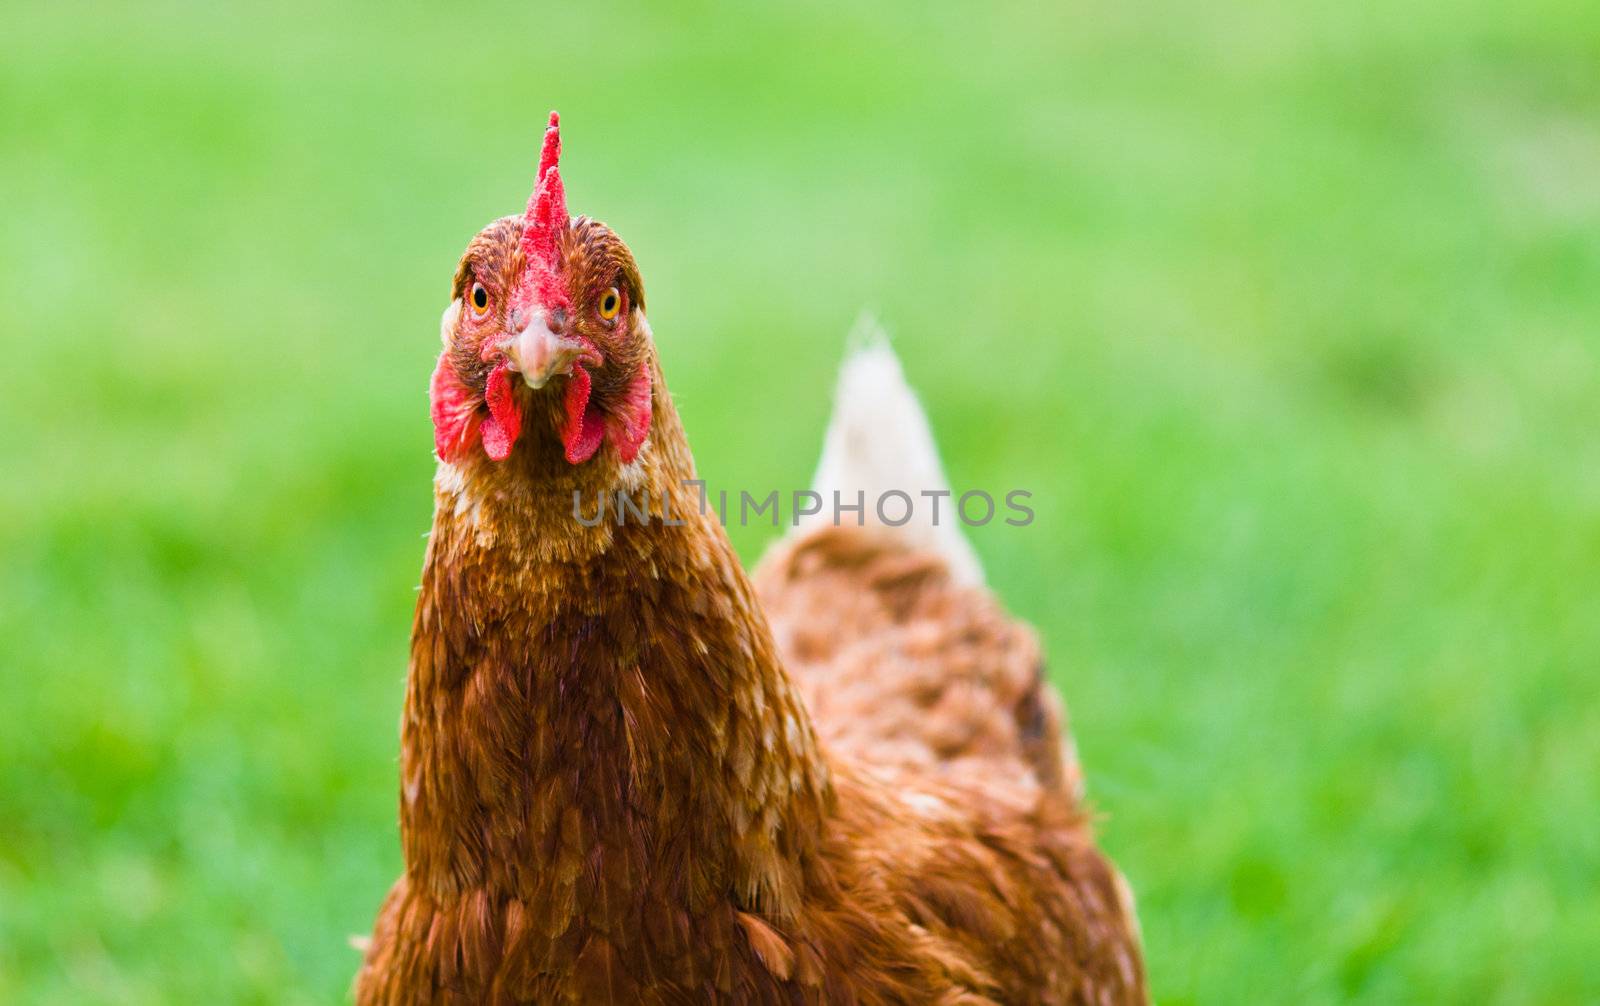 Brown hen on a lawn grass background is blurry